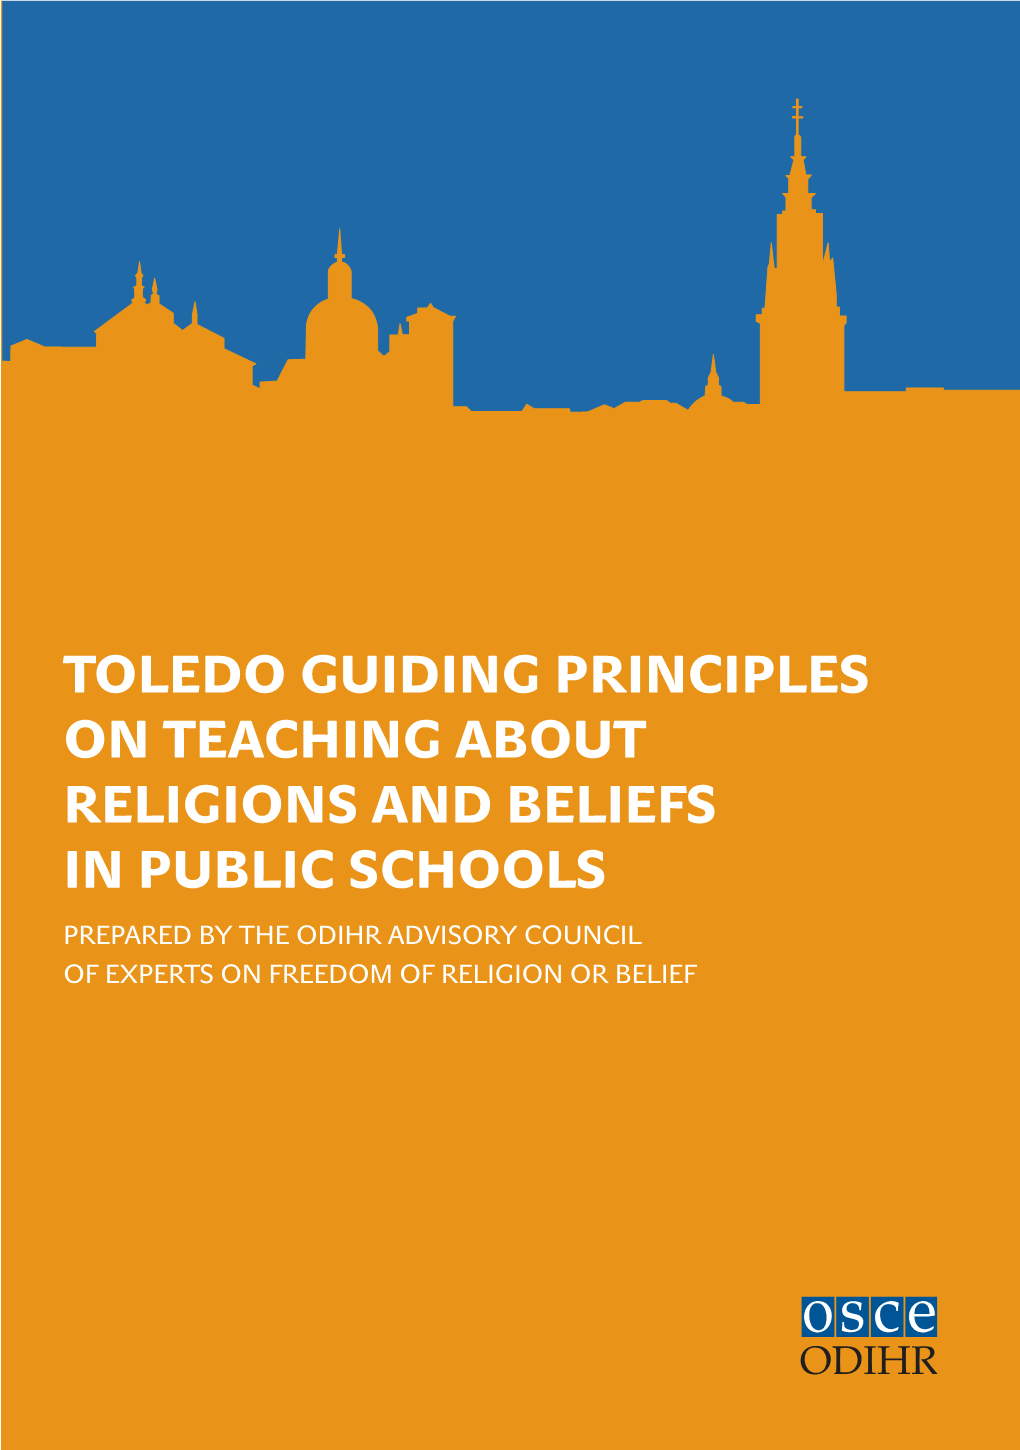 Toledo Guiding Principles on Teaching About Religions and Beliefs in Public Schools